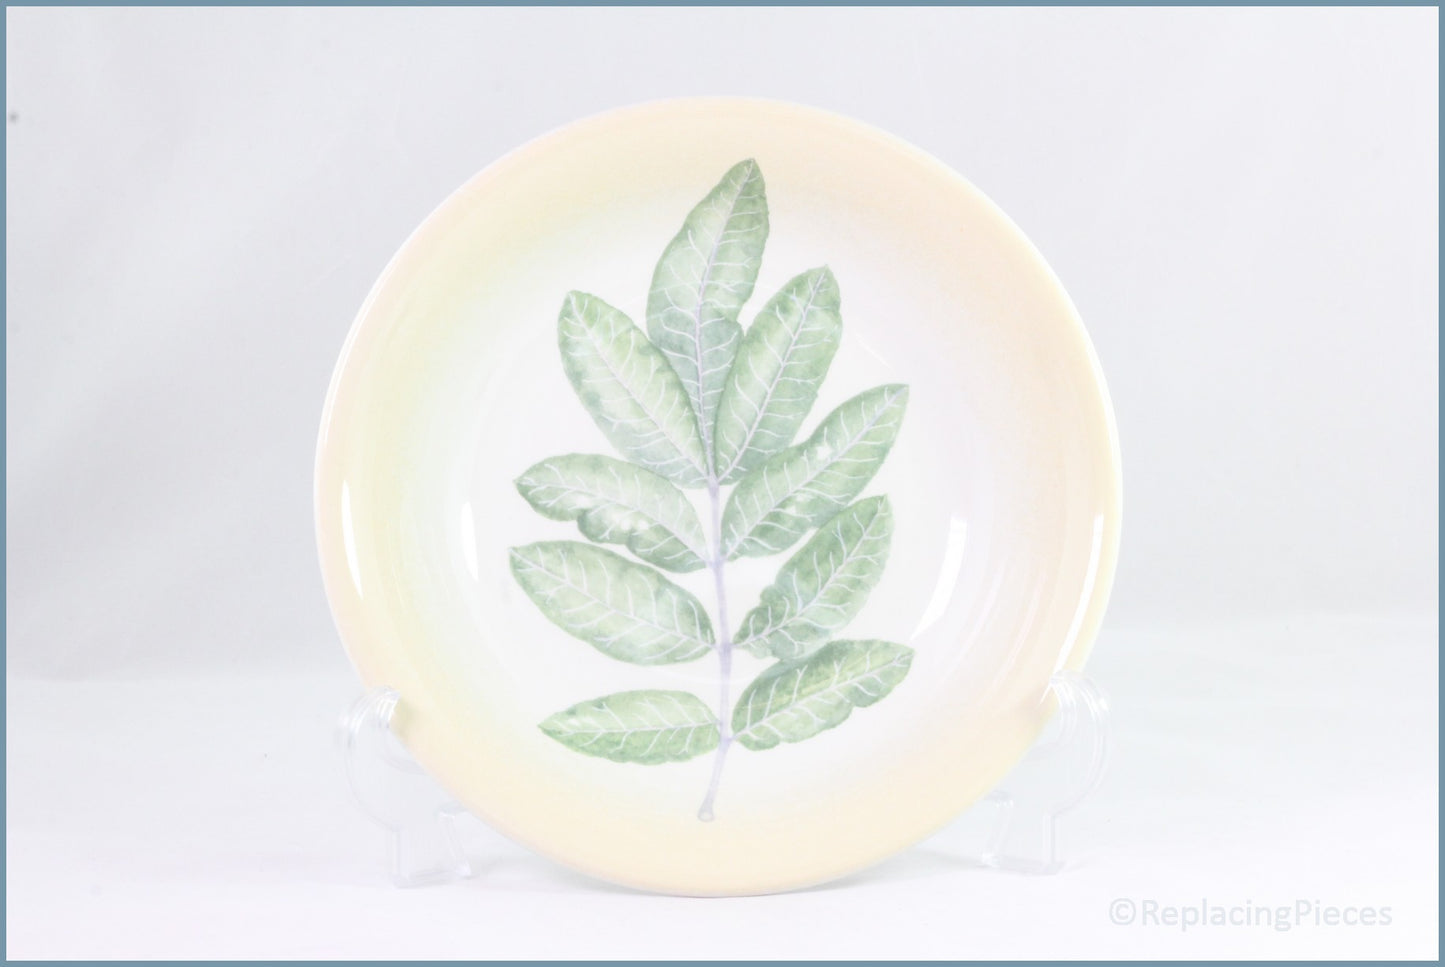 Portmeirion - Seasons Collection (Leaves) - 8 3/4" Pasta Bowl (Fern)